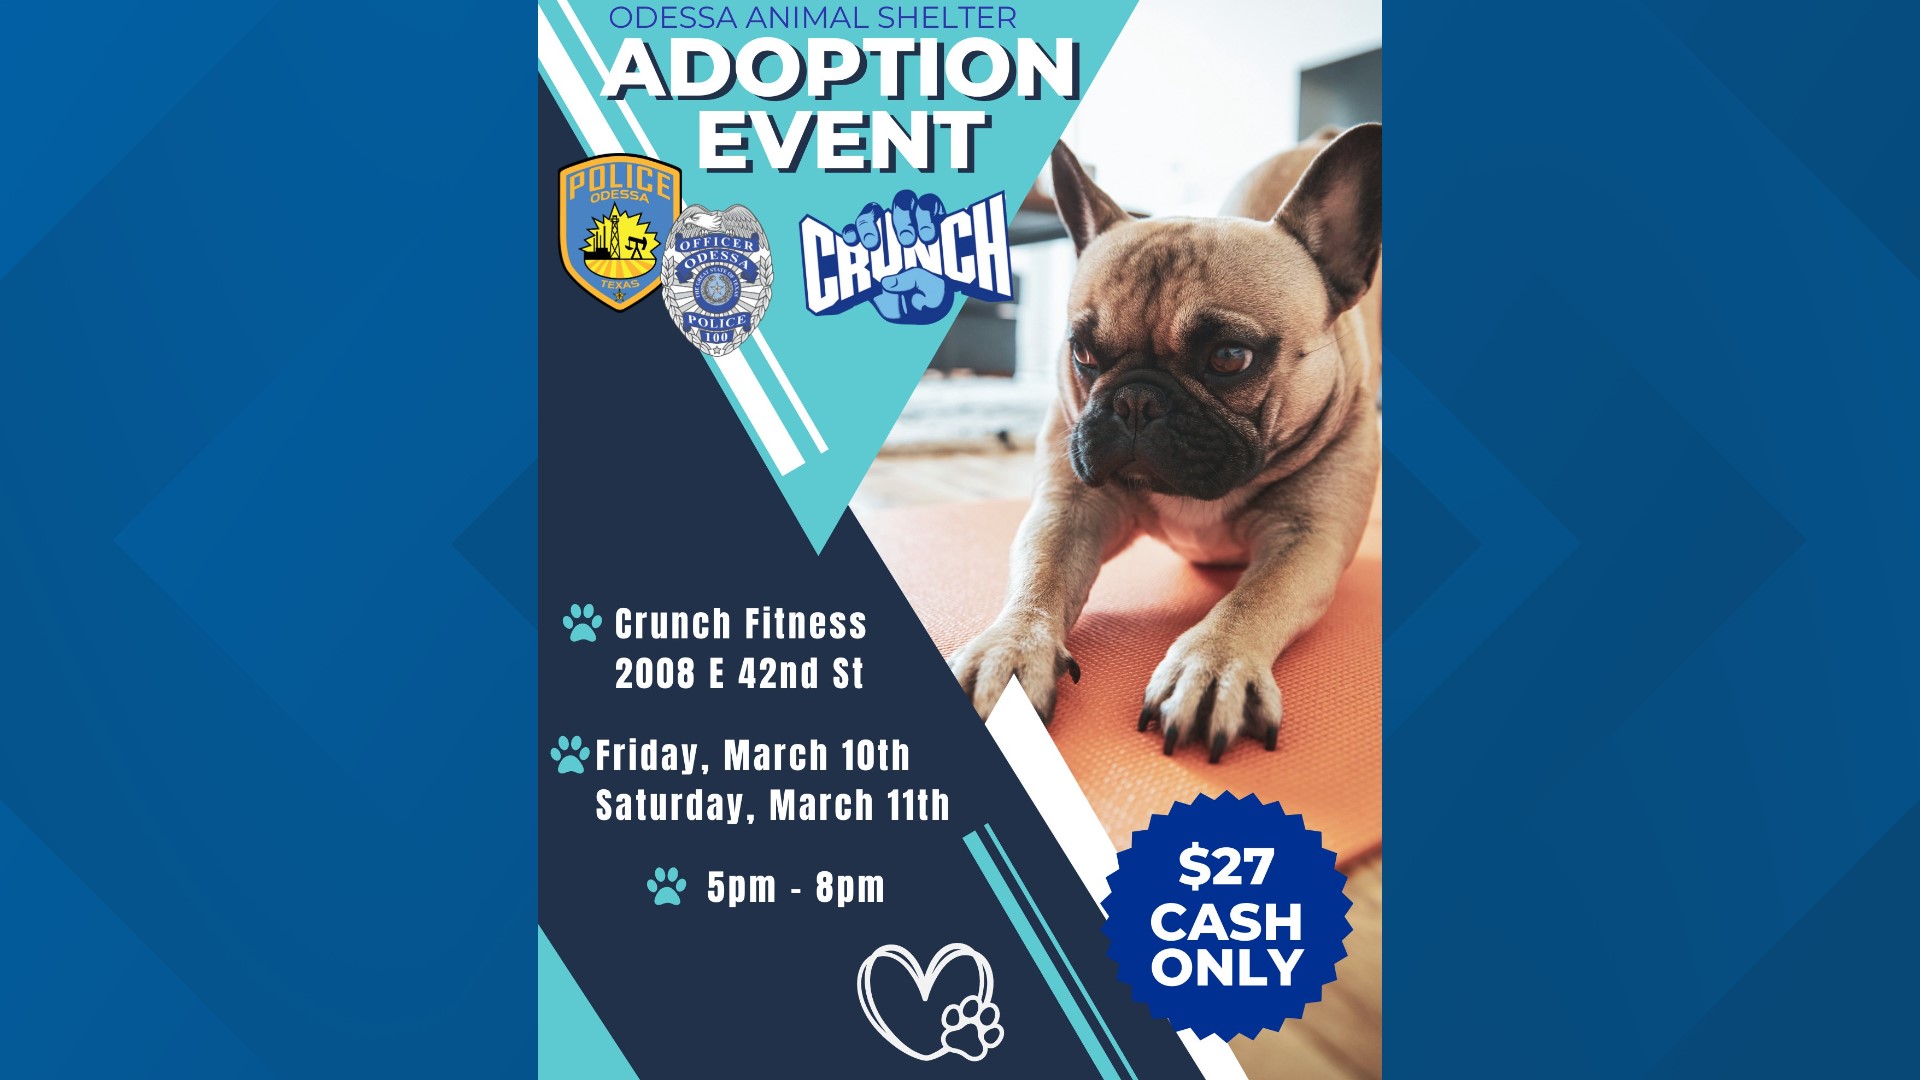 Odessa Animal Shelter to host adoption events on March 10-11 